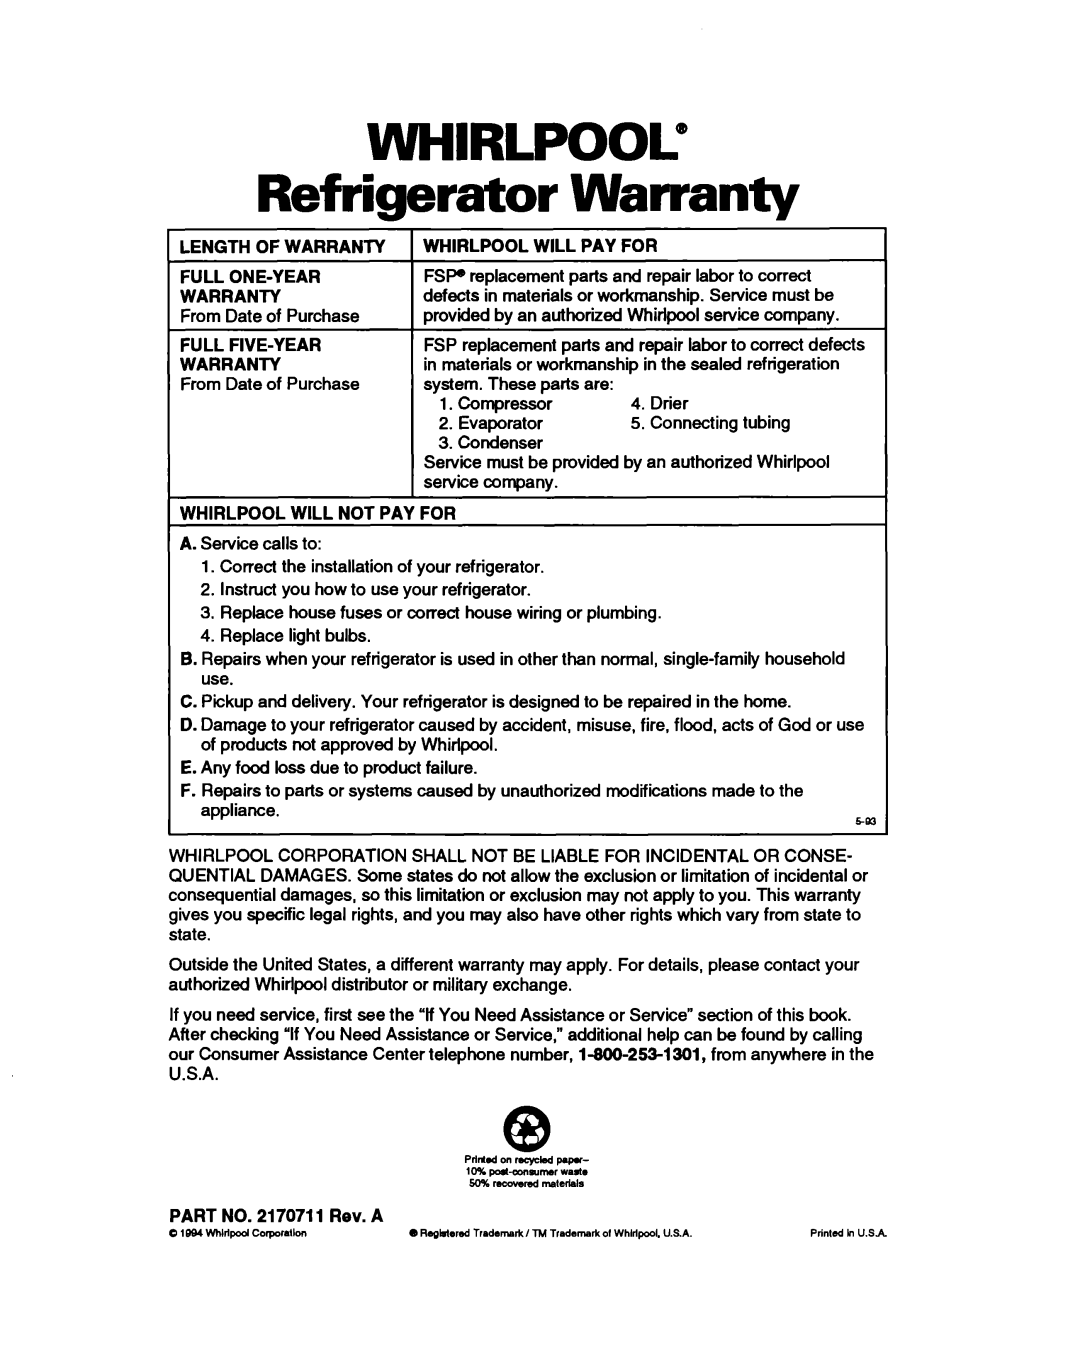 Whirlpool ED25PB Refrigerator, Whirlpool@, Length Of Warranty, Whirlpool Will Pay For, Full One-Year, Full Five-Year 